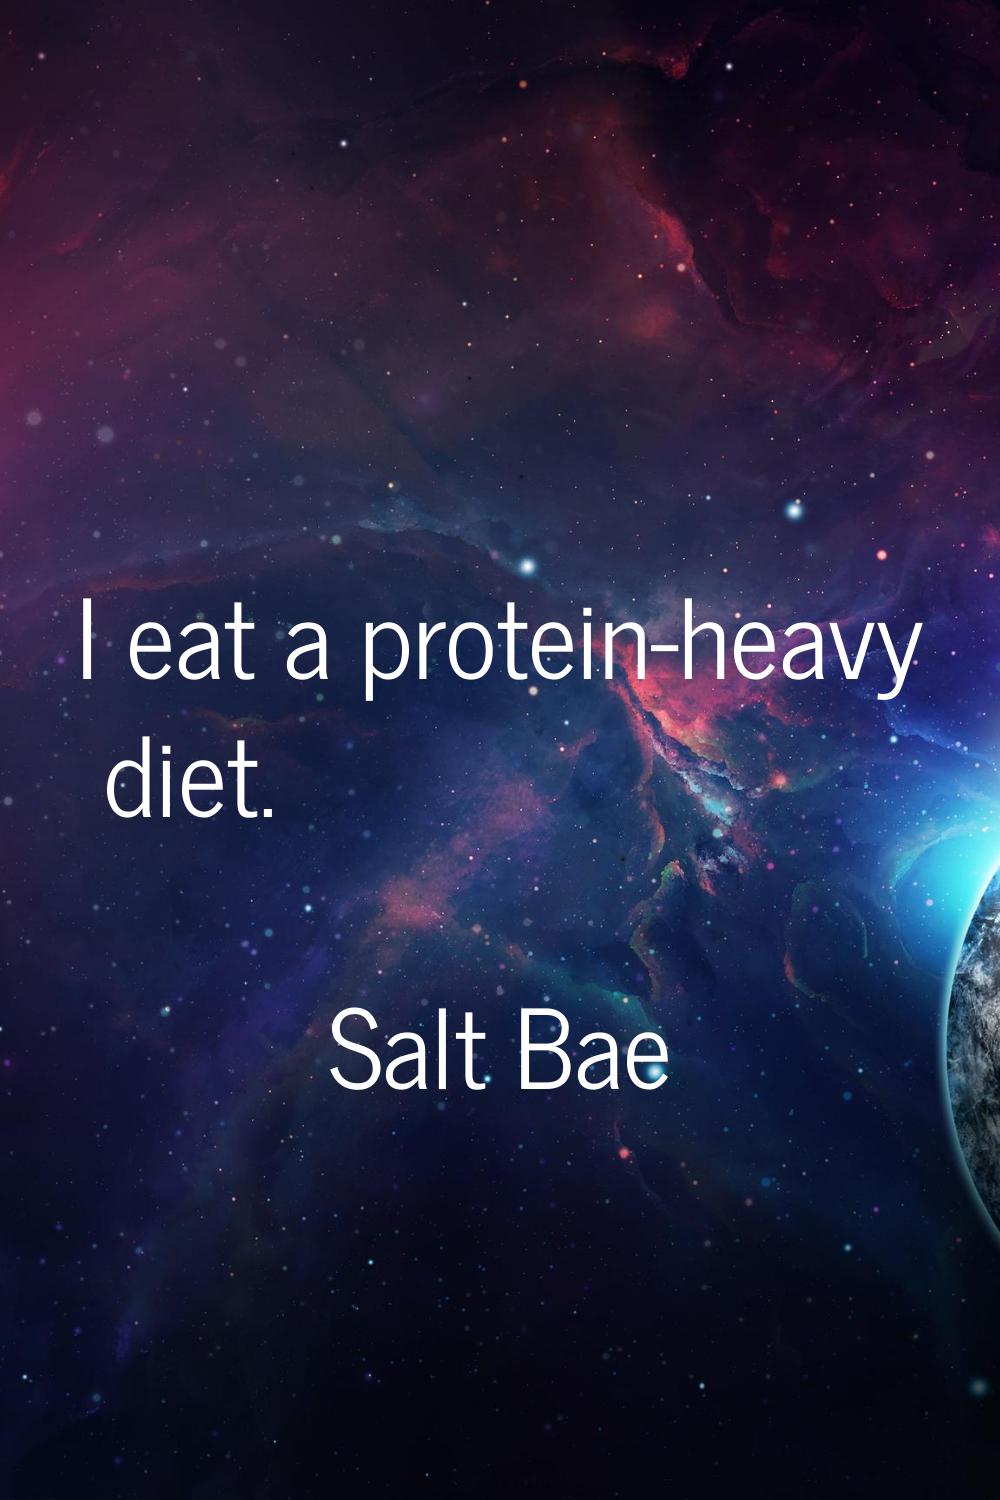 I eat a protein-heavy diet.